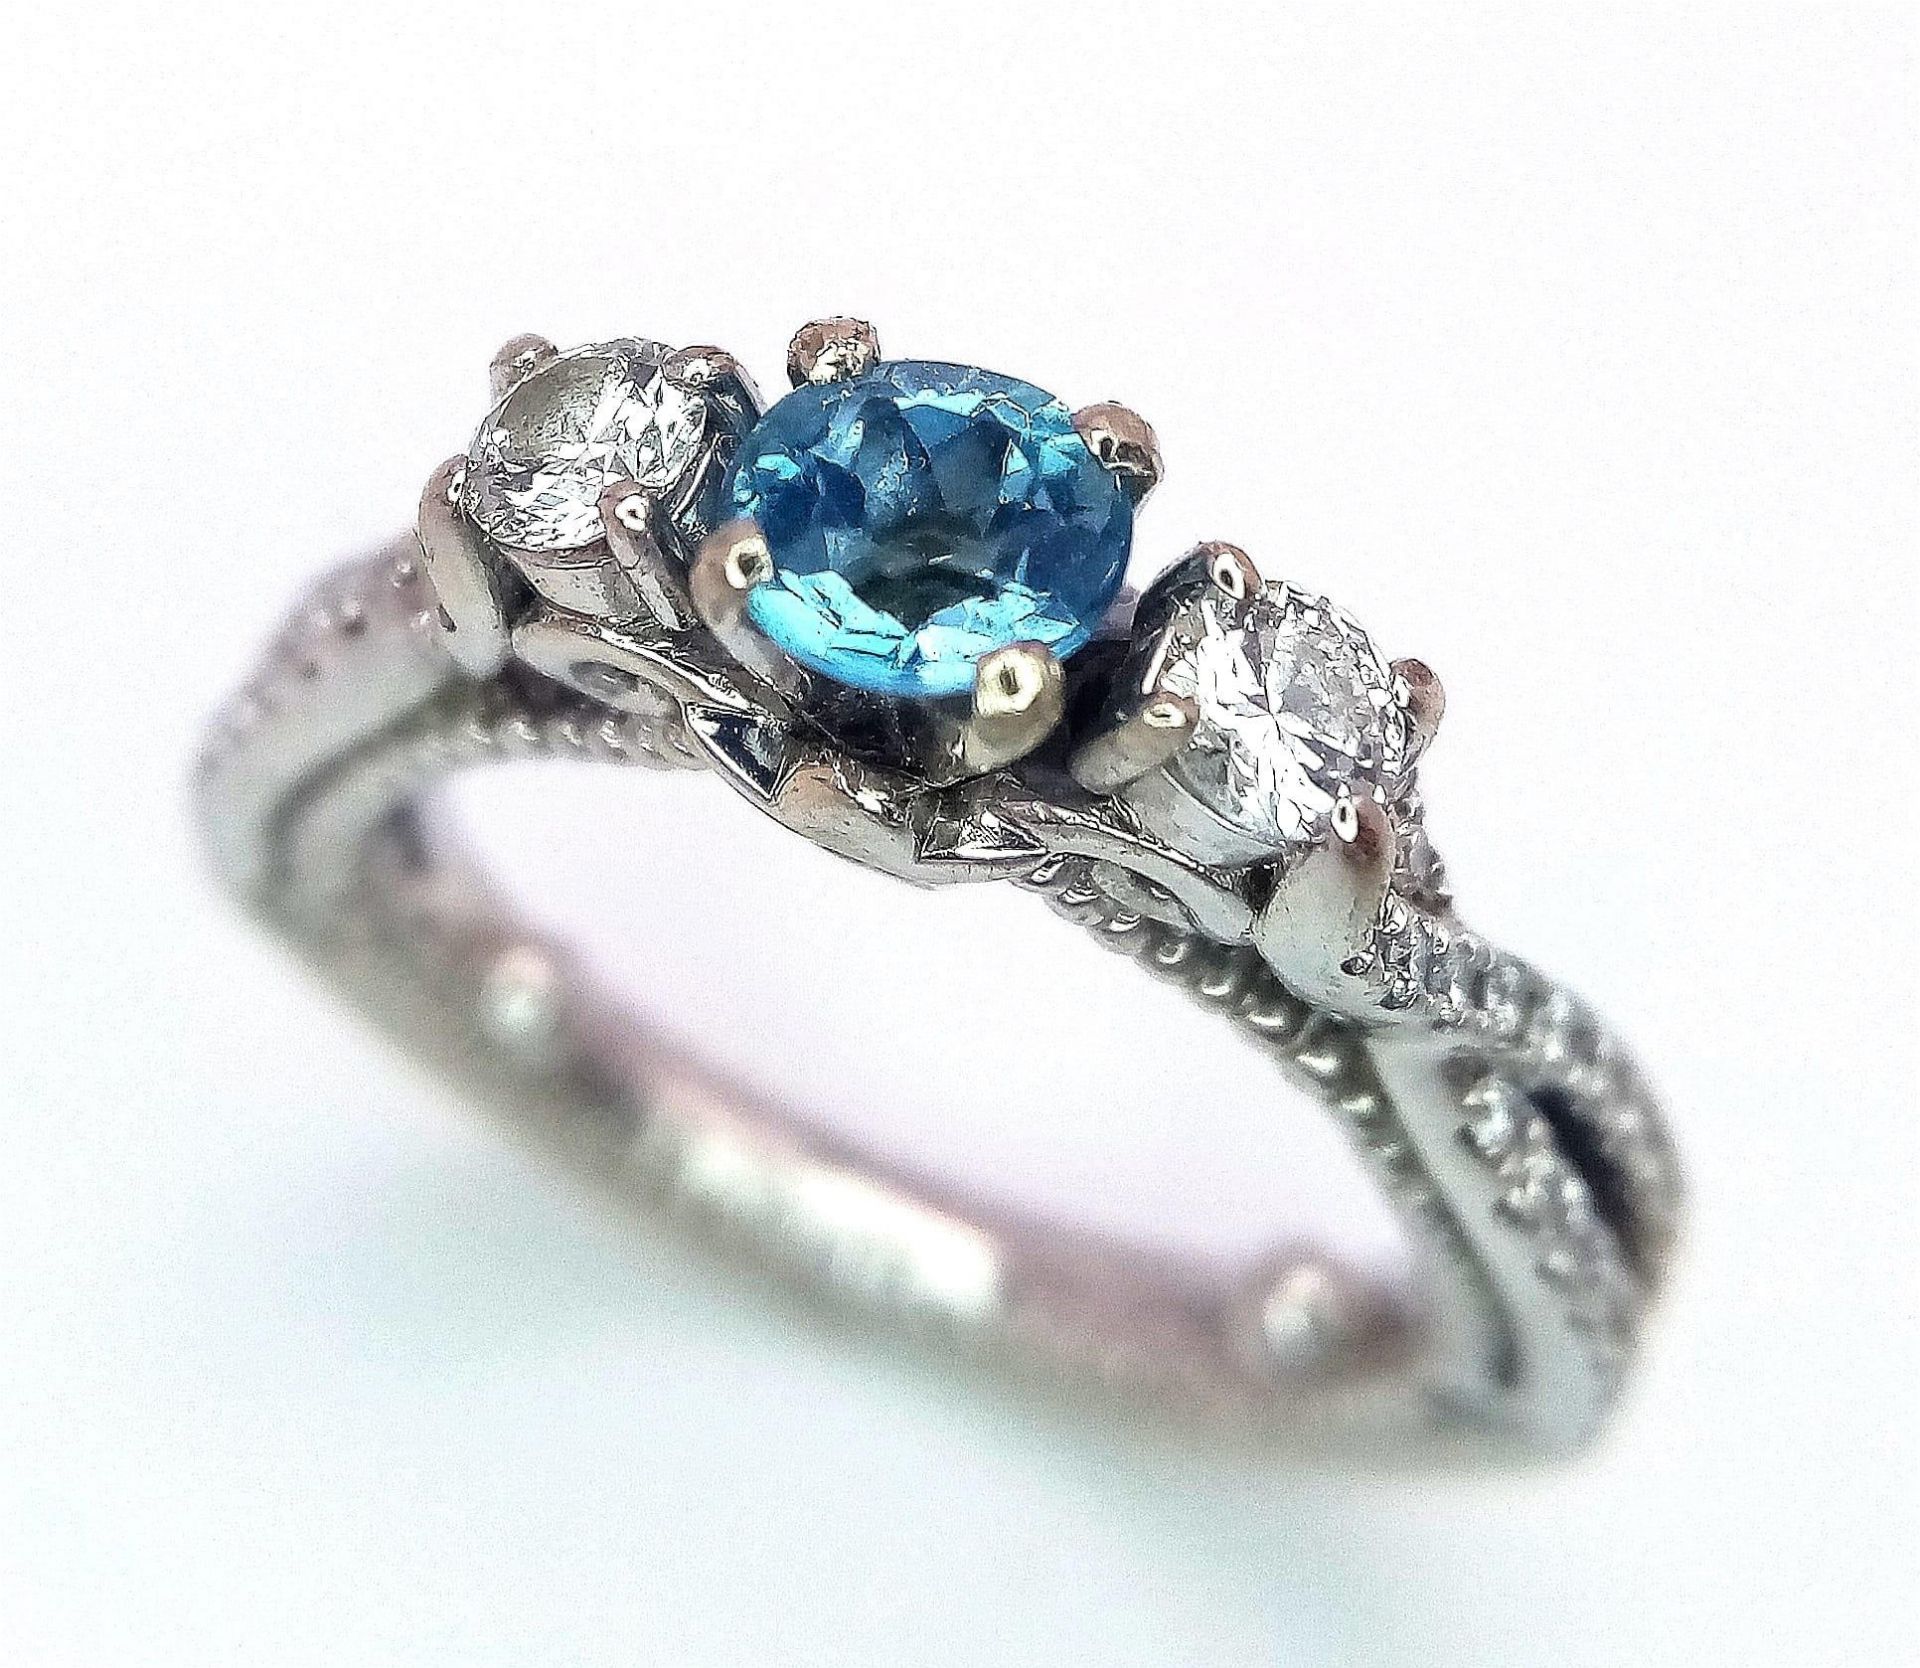 A STUNNING 18K WHITE GOLD DIAMOND & TOPAZ TRILOGY RING, APPROX 0.40CT TOPAZ CENTRE AND 0.45CT